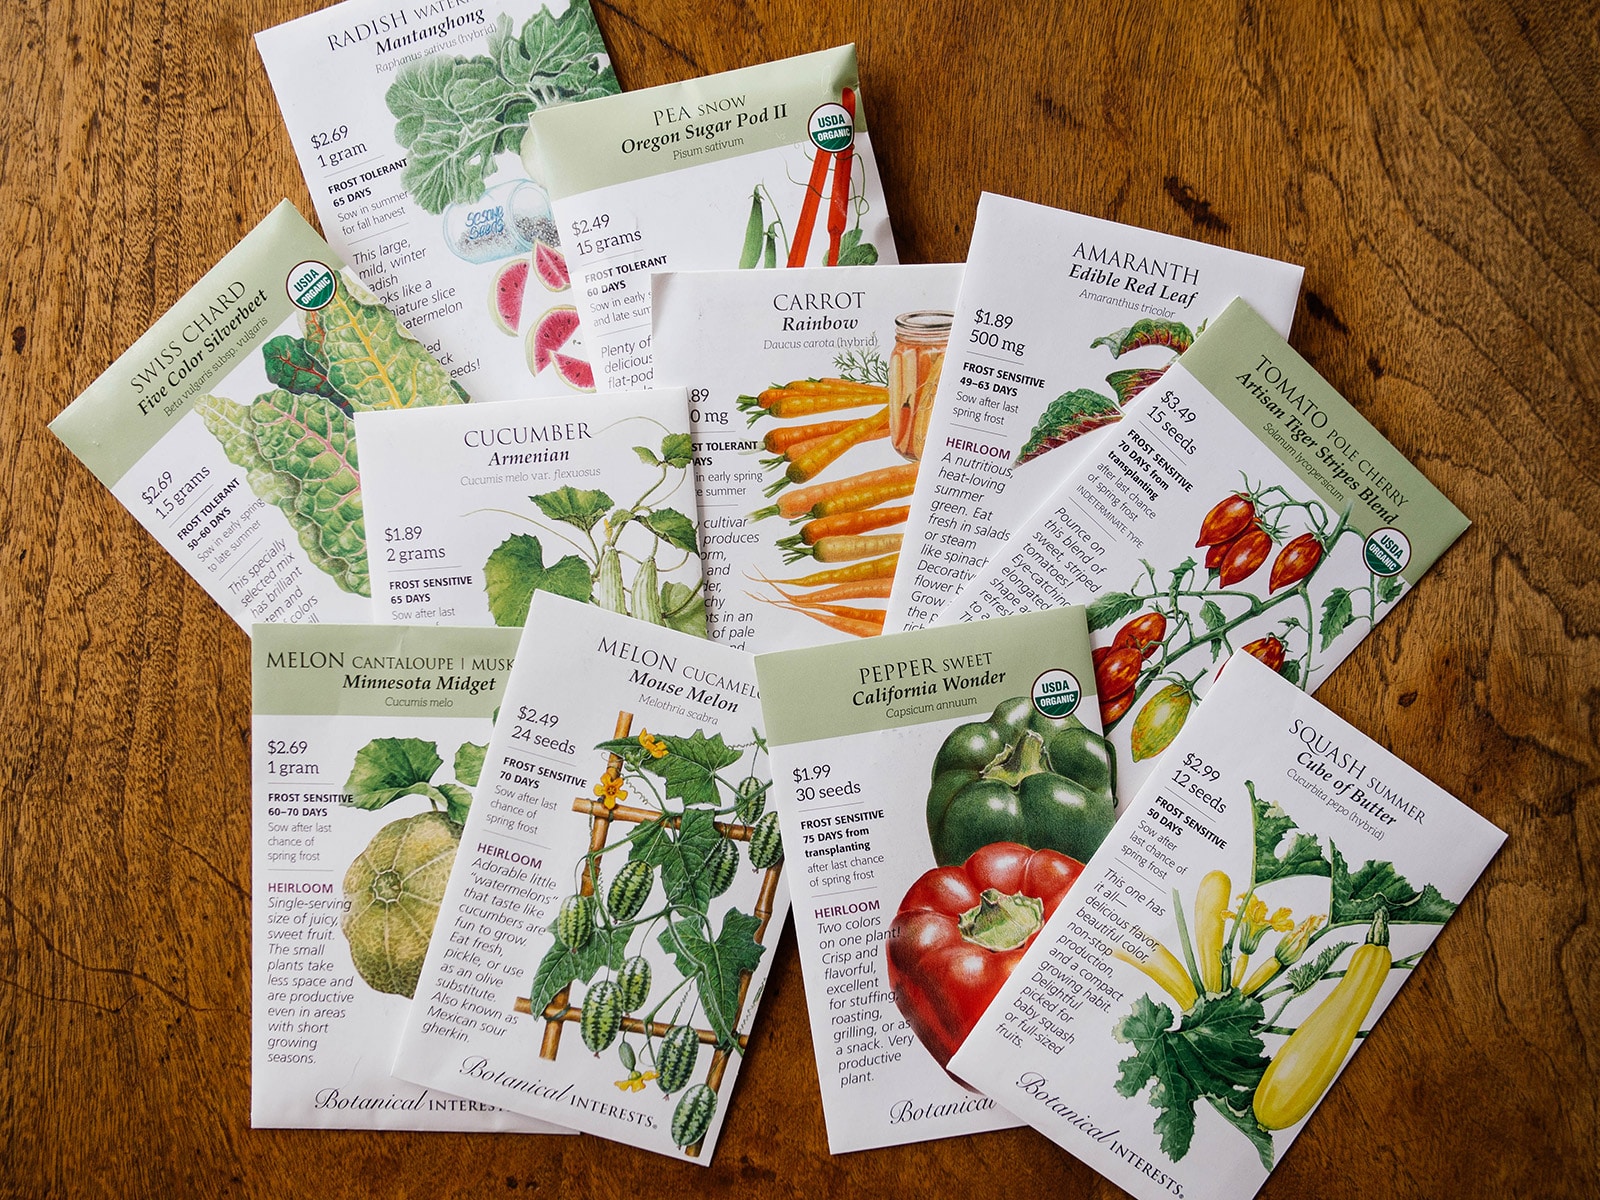 Botanical Interests seed packets spread out on a wooden surface